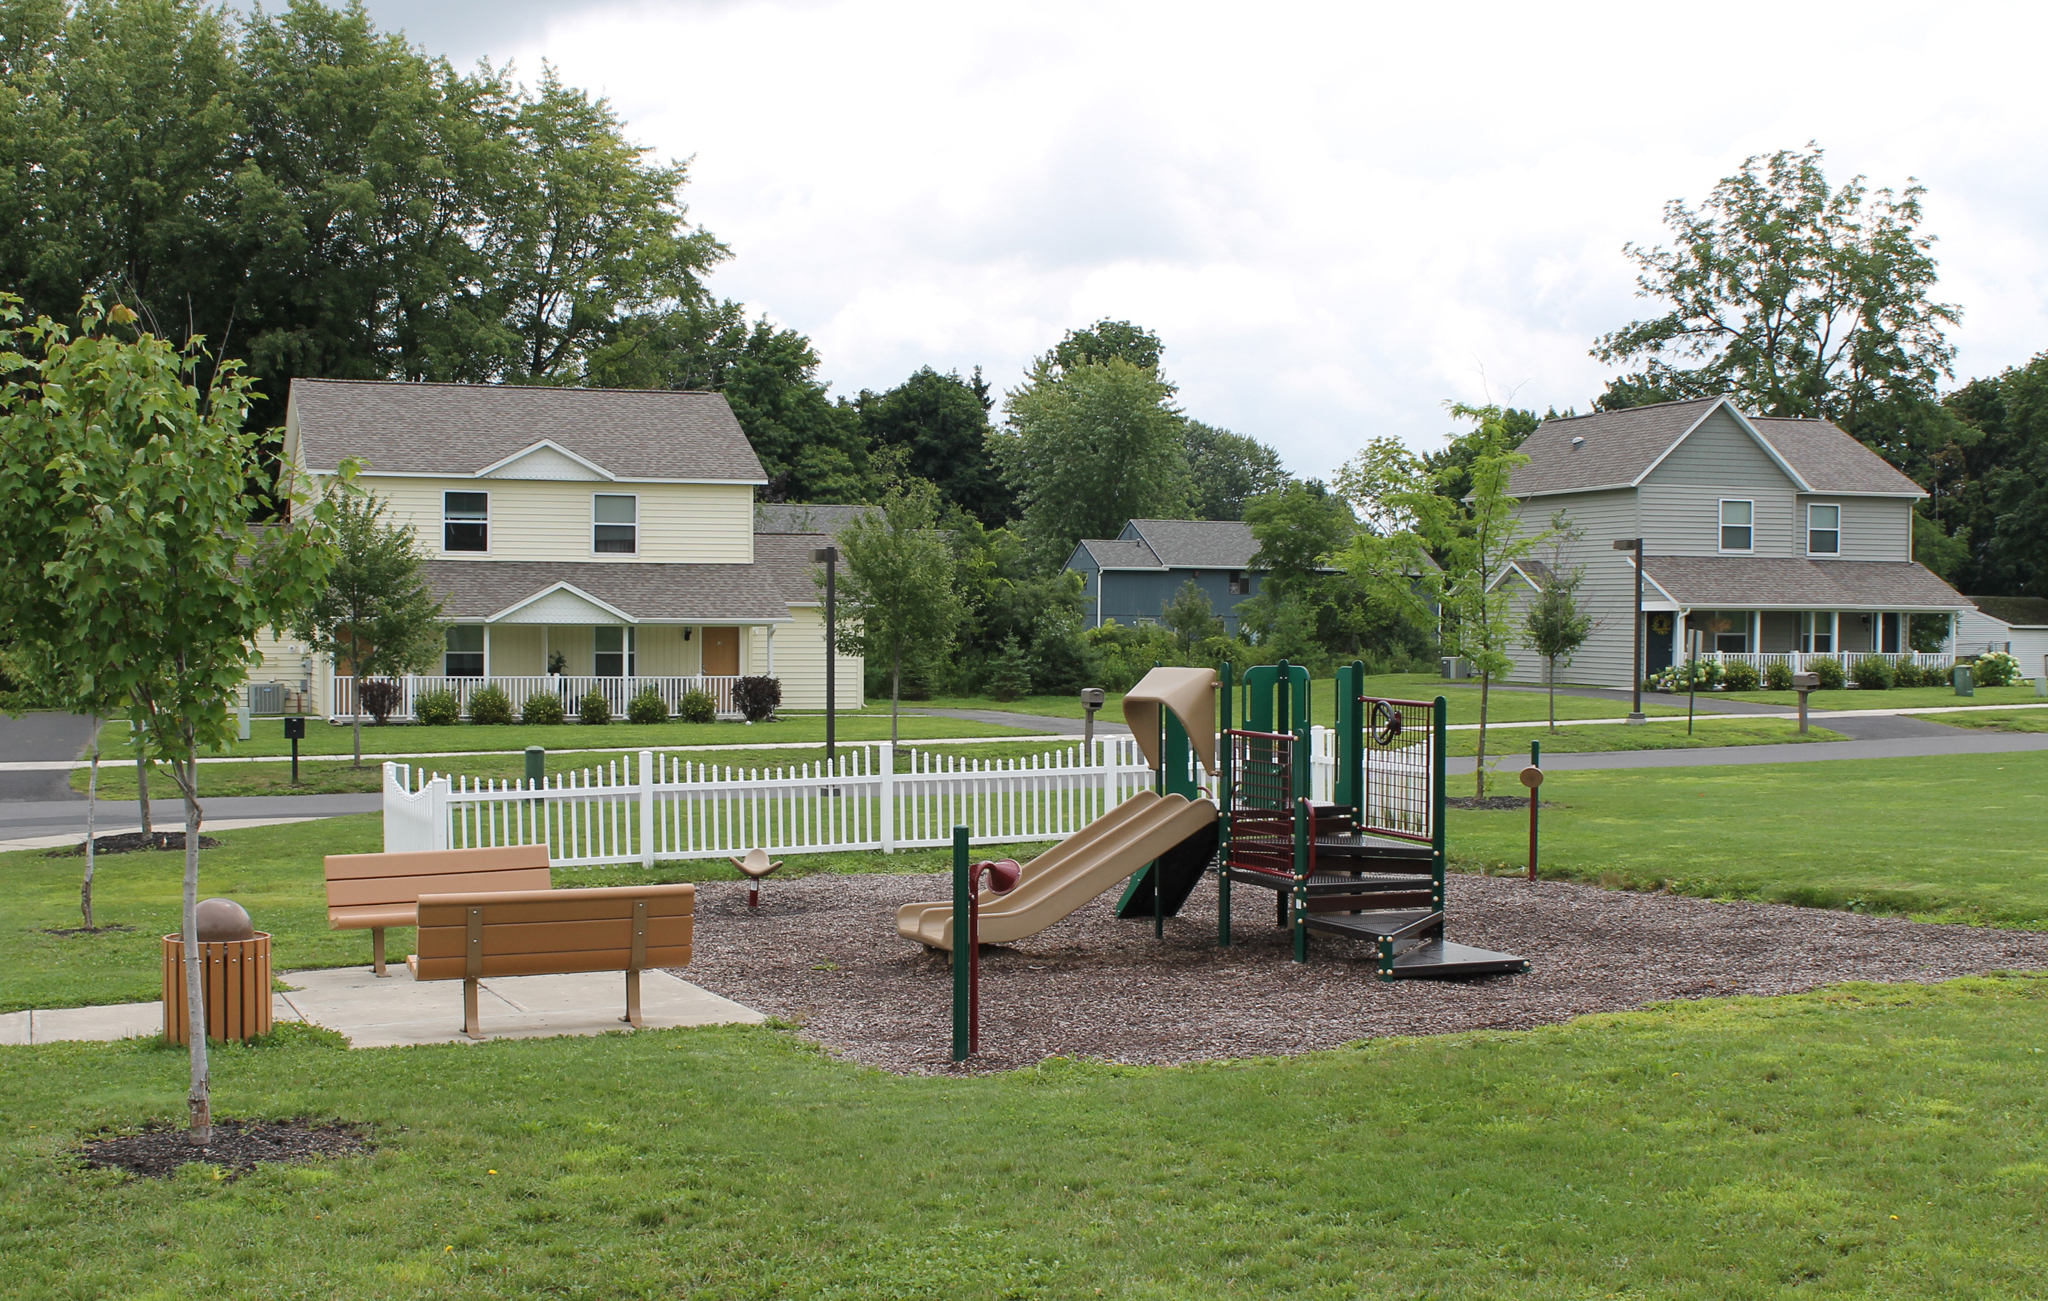 property management company client list syracuse ny image of pearce playground at greenview hills